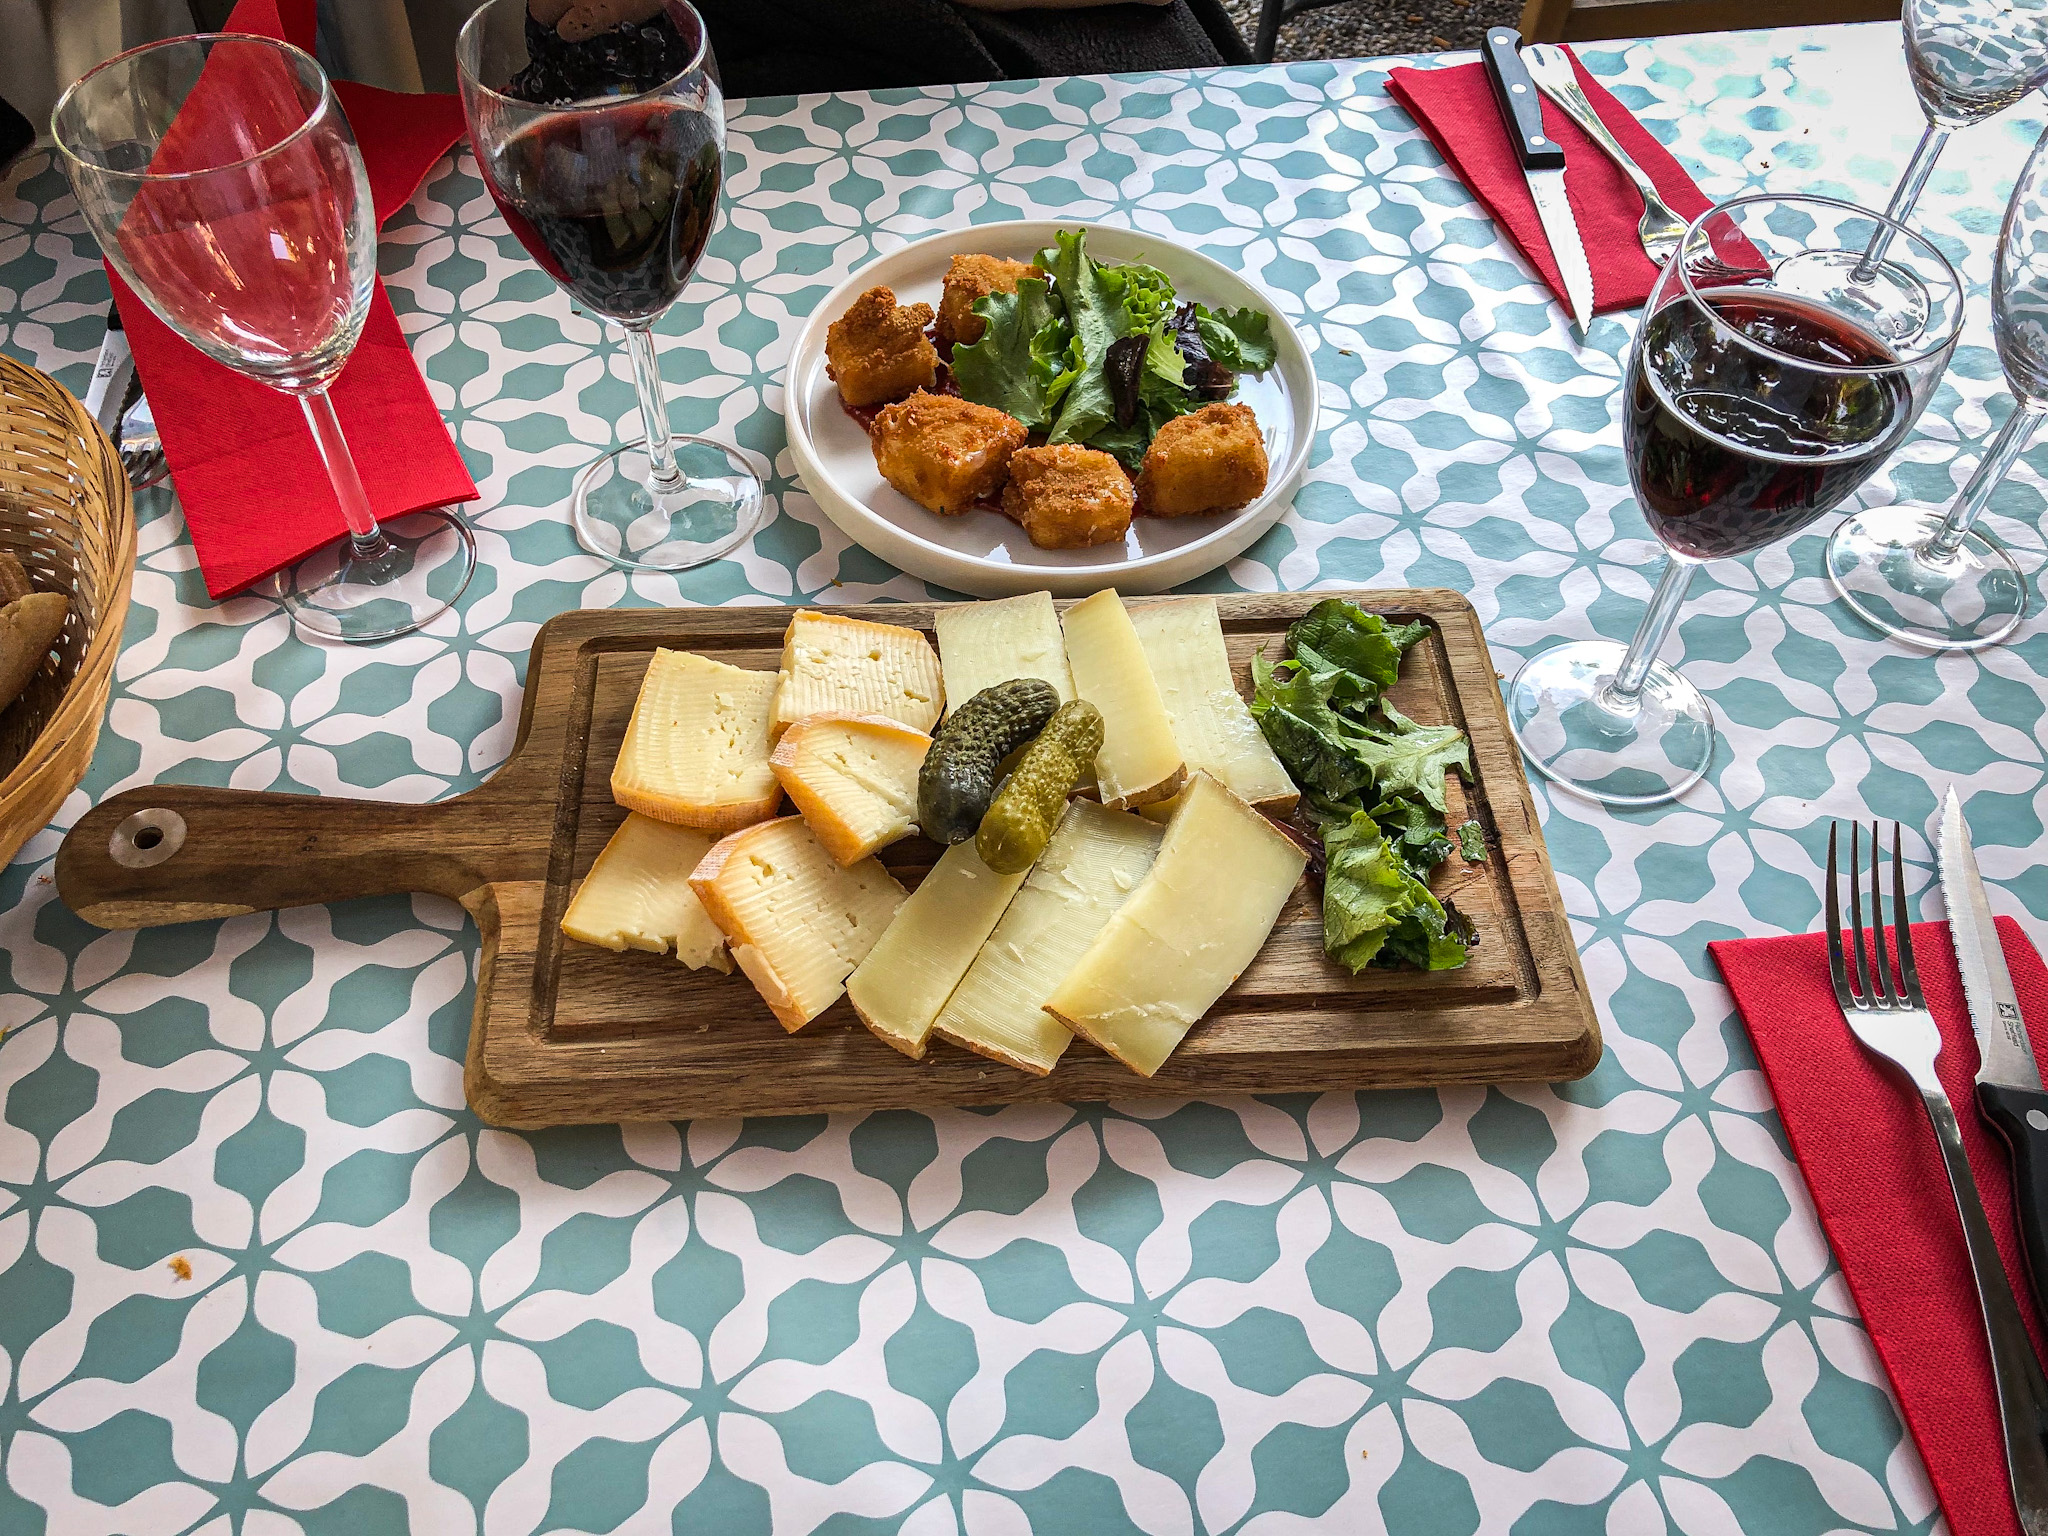 Cheese platter with red wine